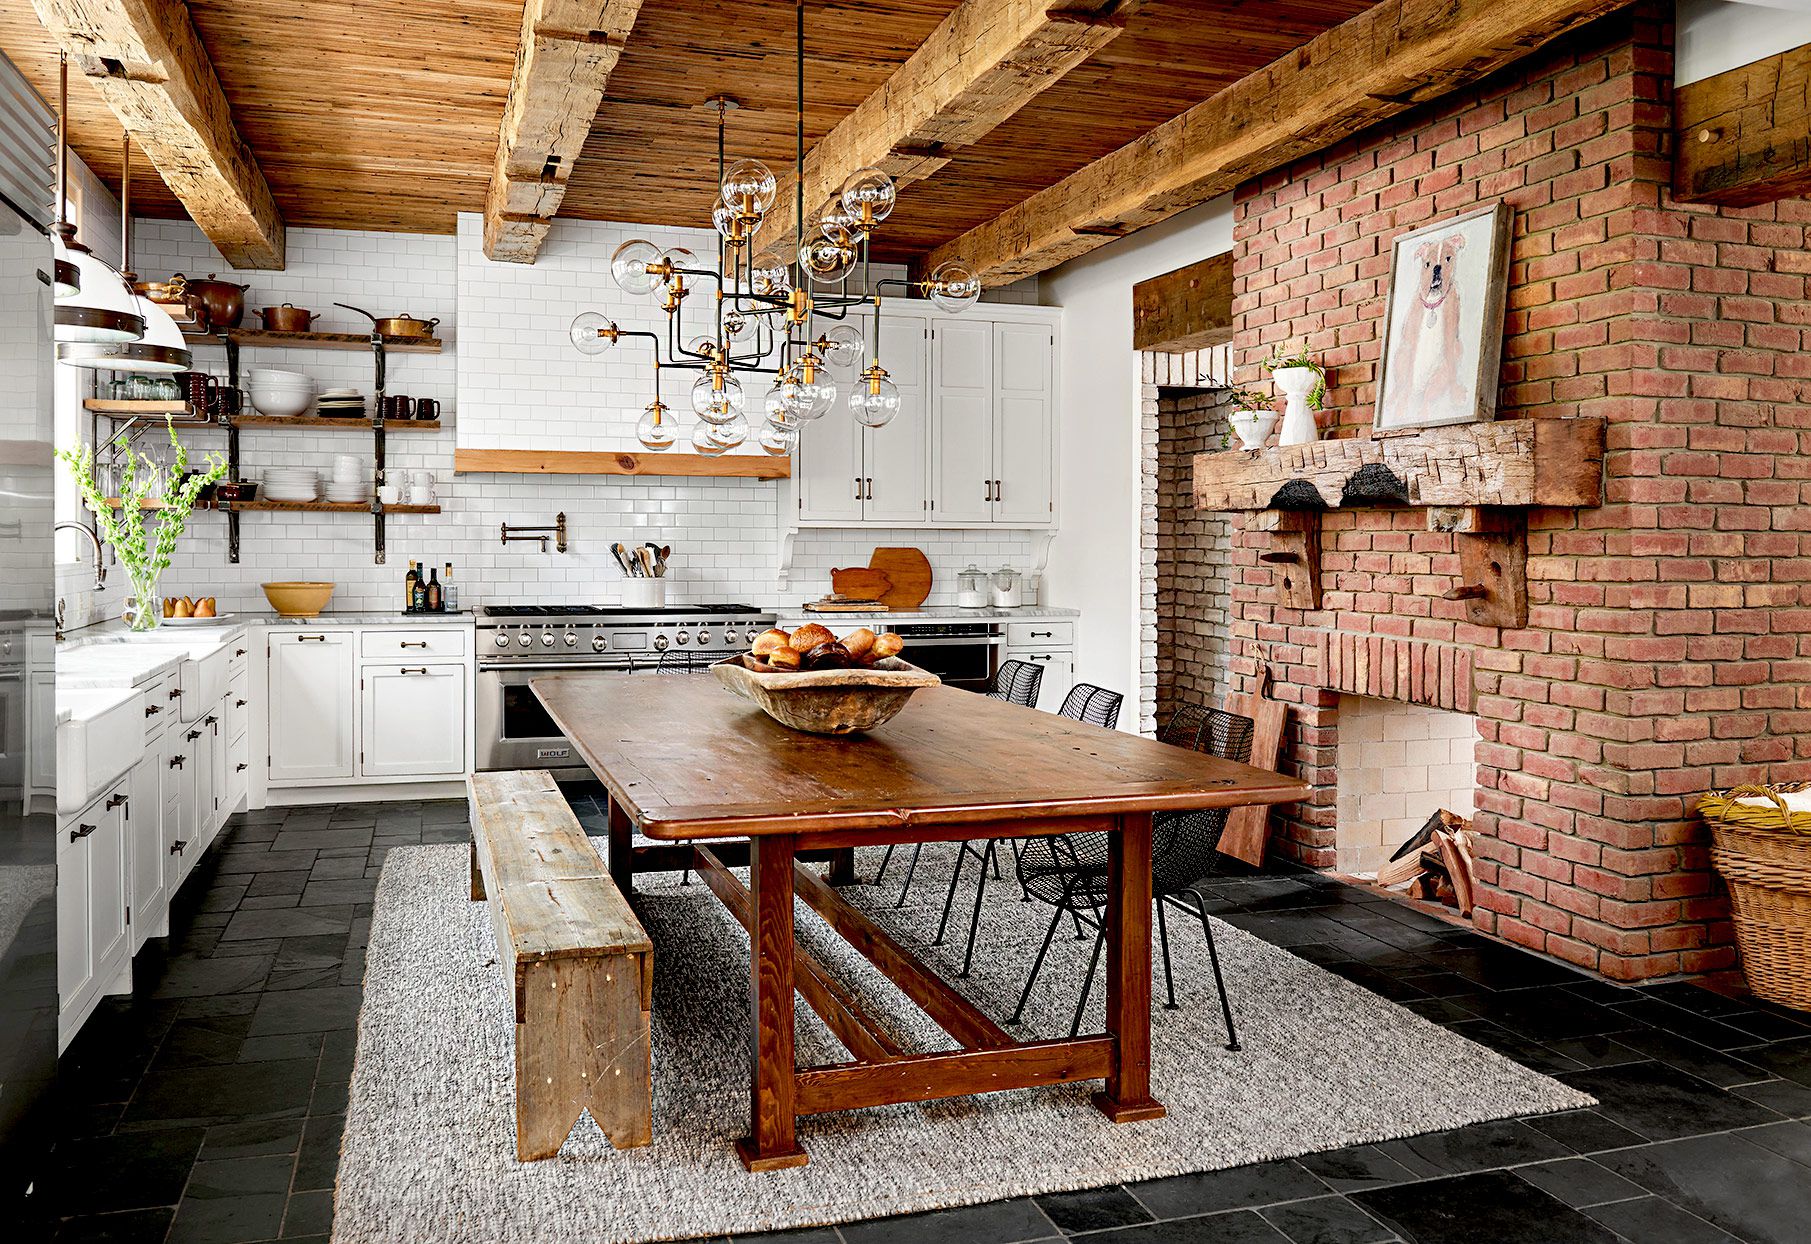 Rustic kitchen with brick fireplace and wooden beams.